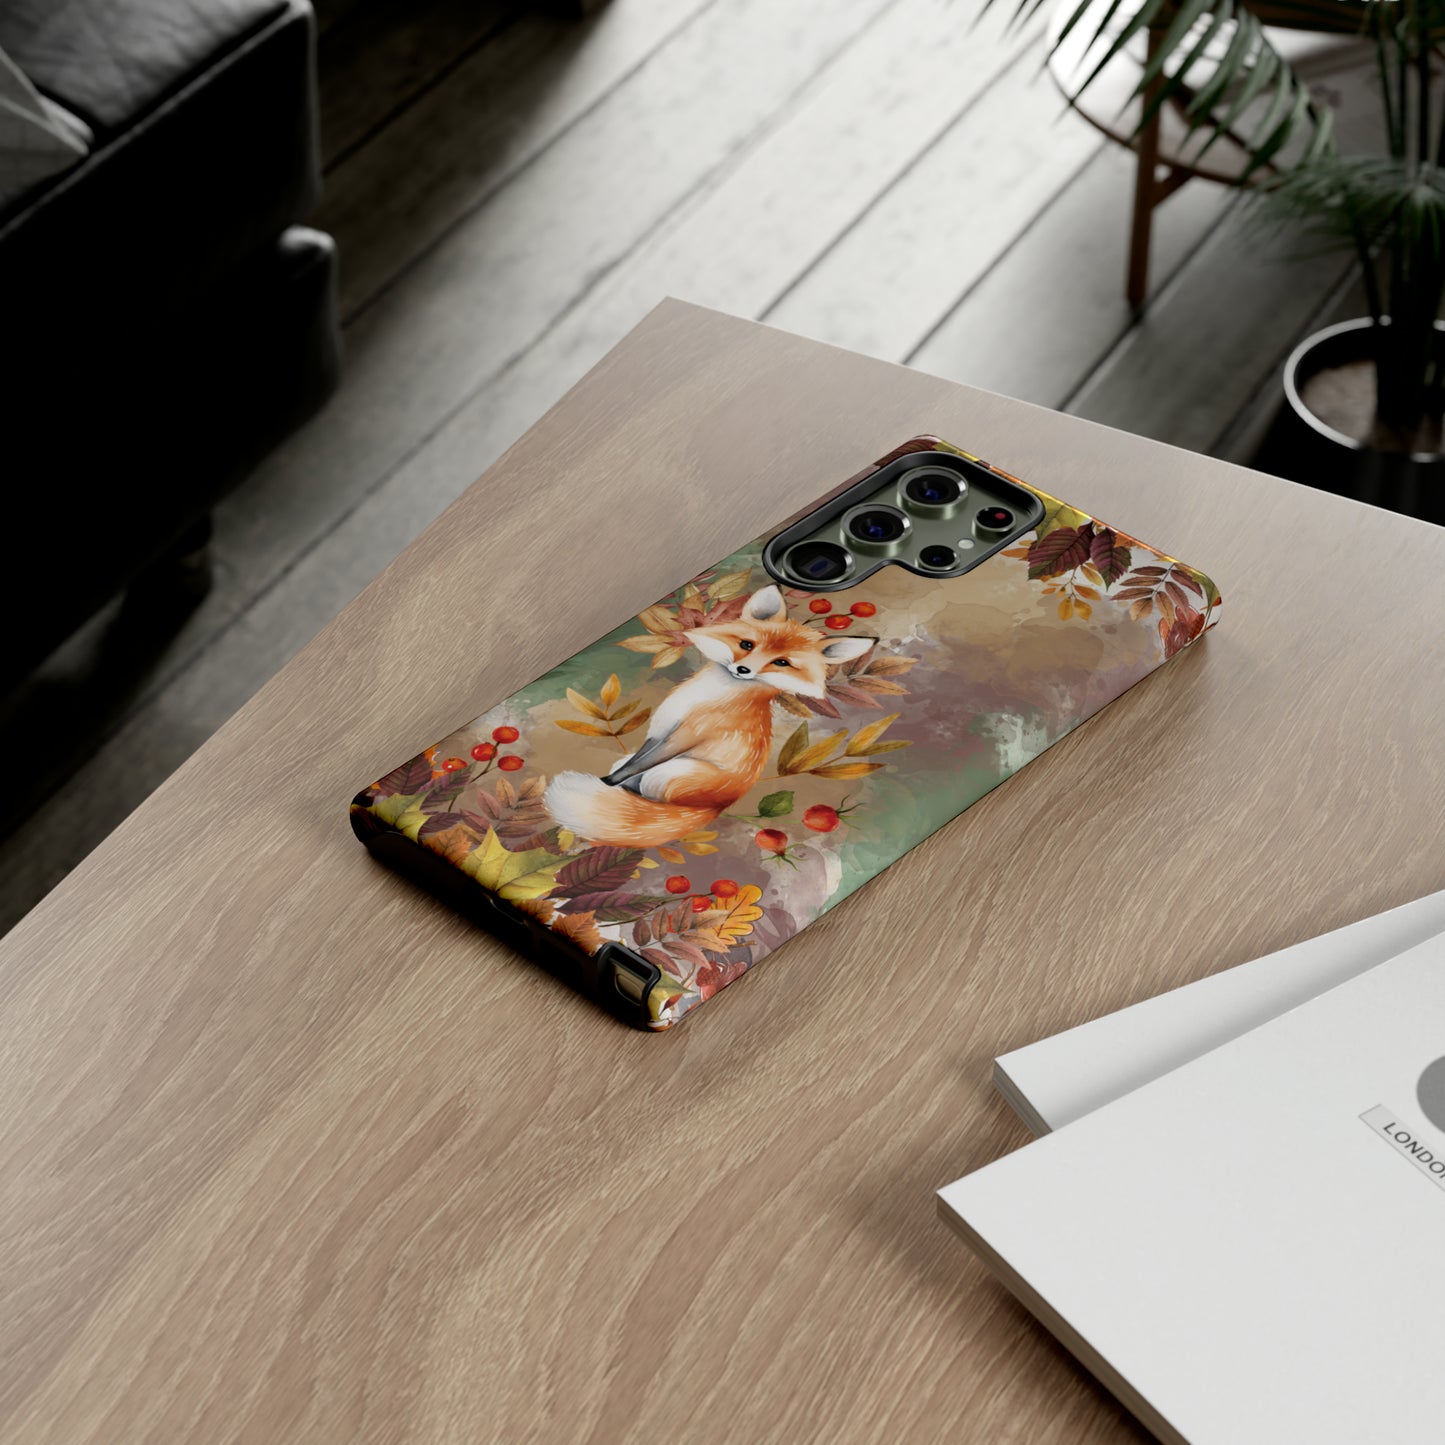 Whimsical Fox and Fall Leaves Tough Phone Case